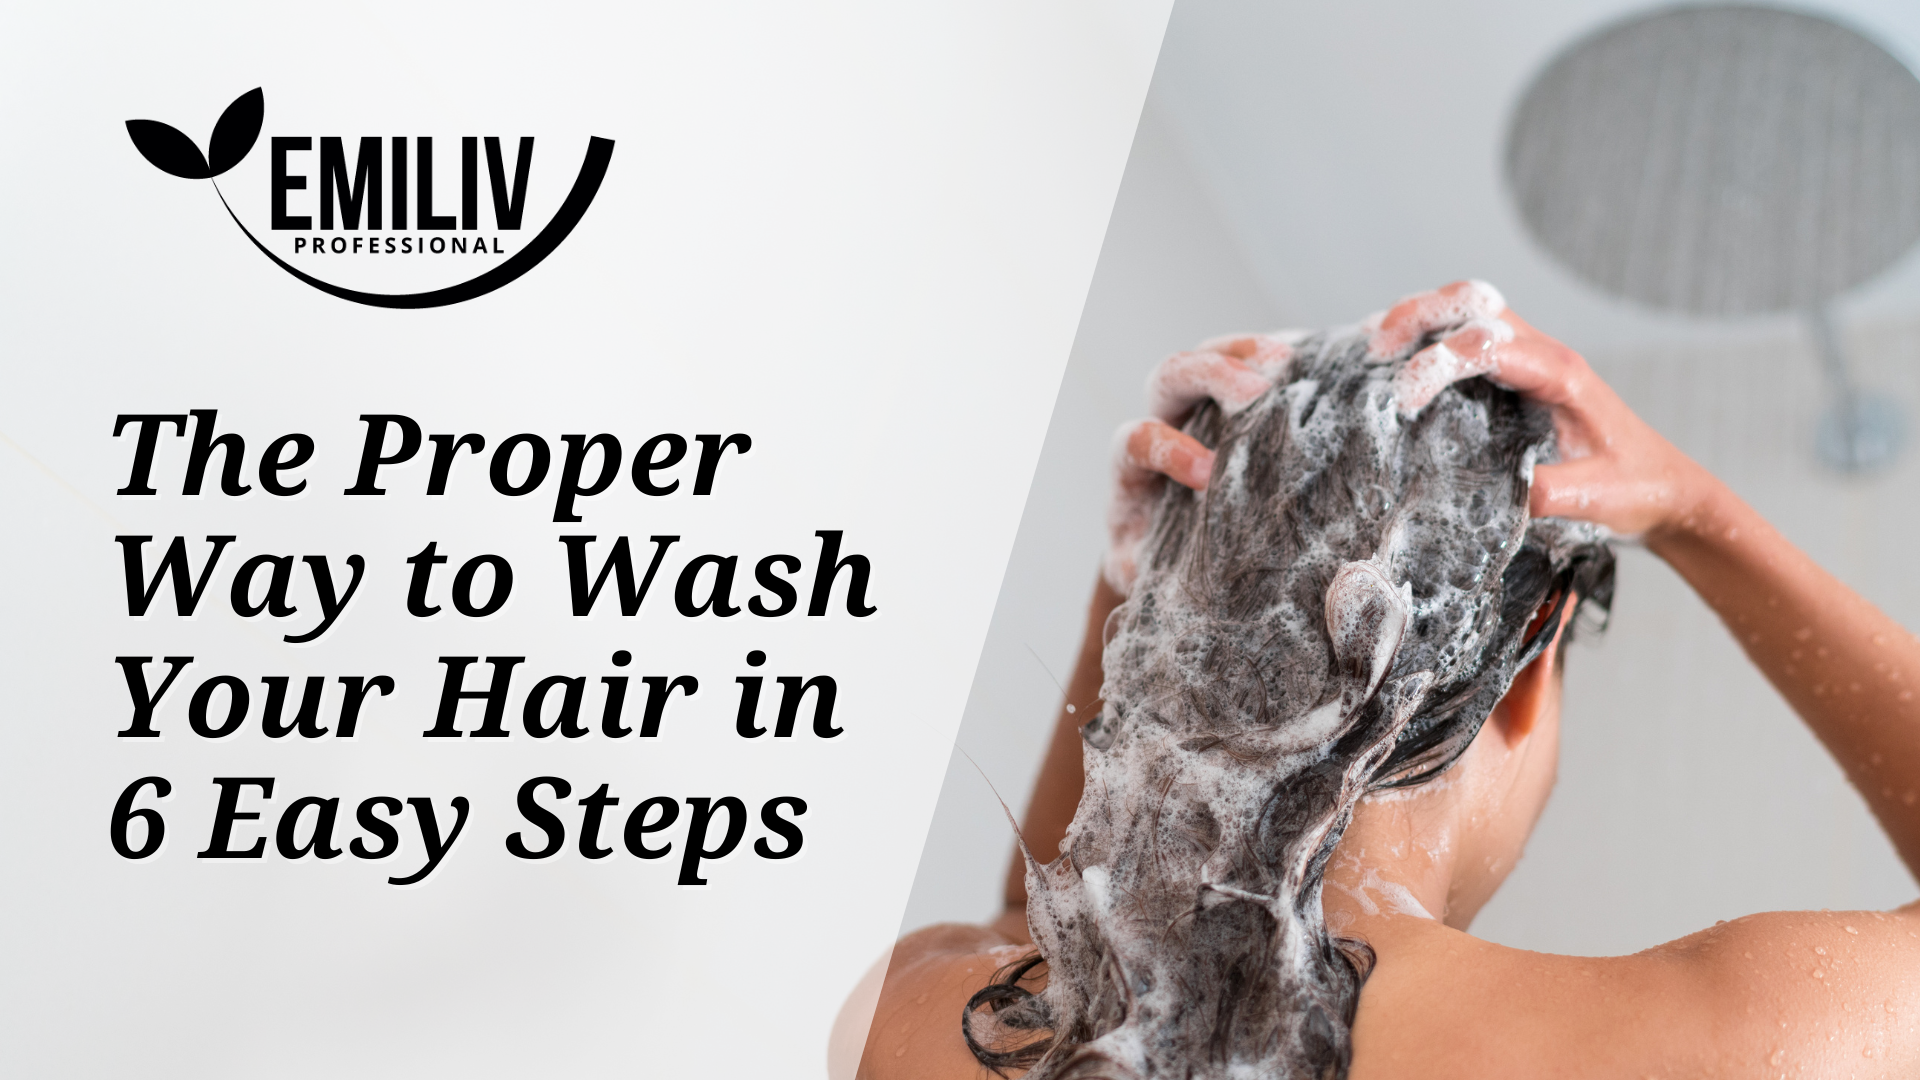 How to Wash Your Hair: 6 Easy Steps